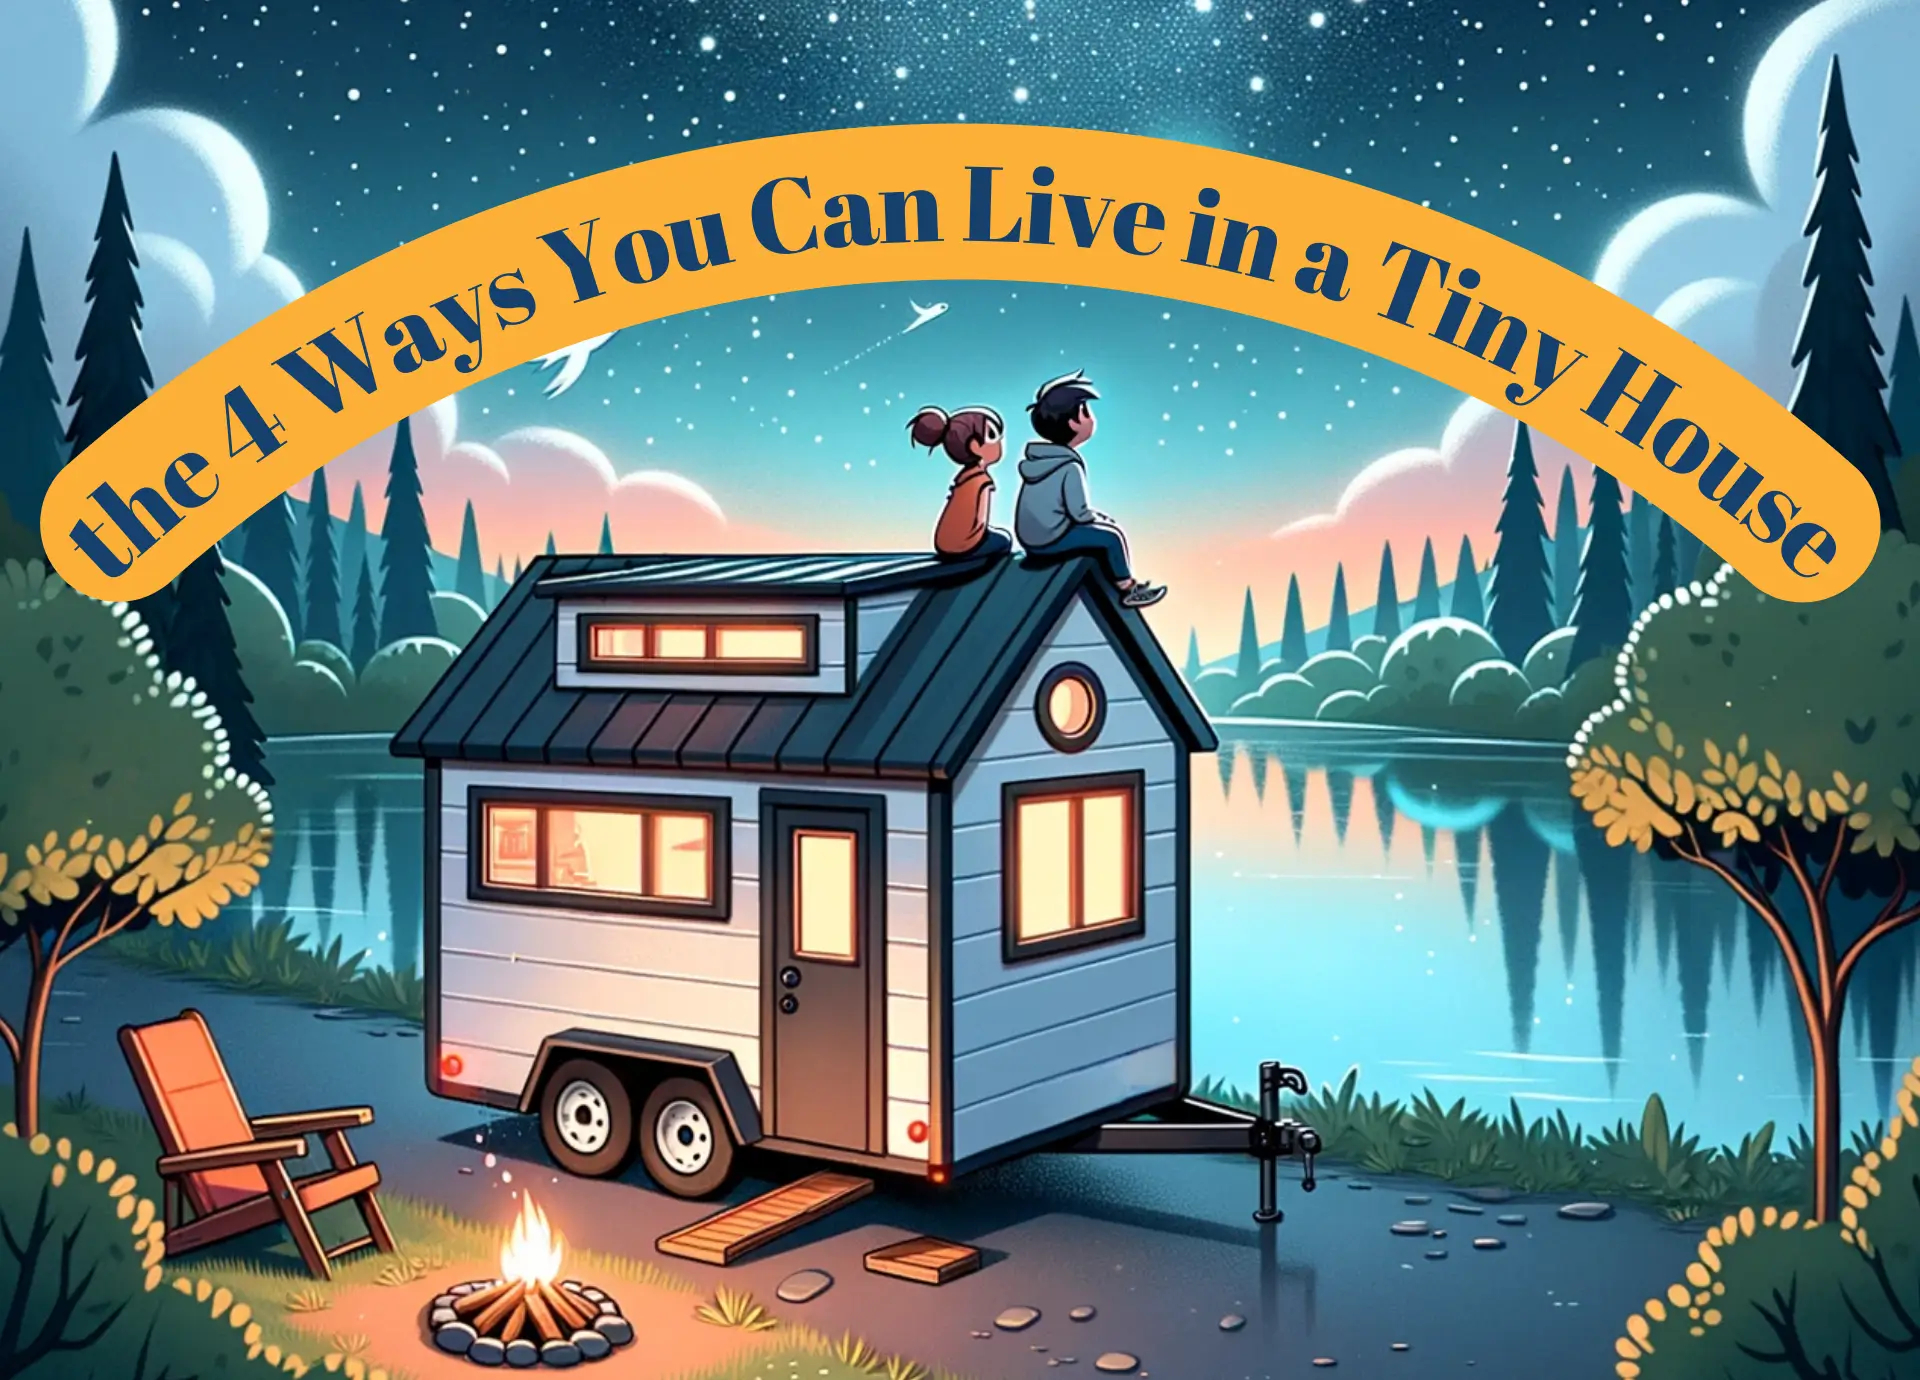 Featured image for “the 4 Ways You Can Live in a Tiny House”